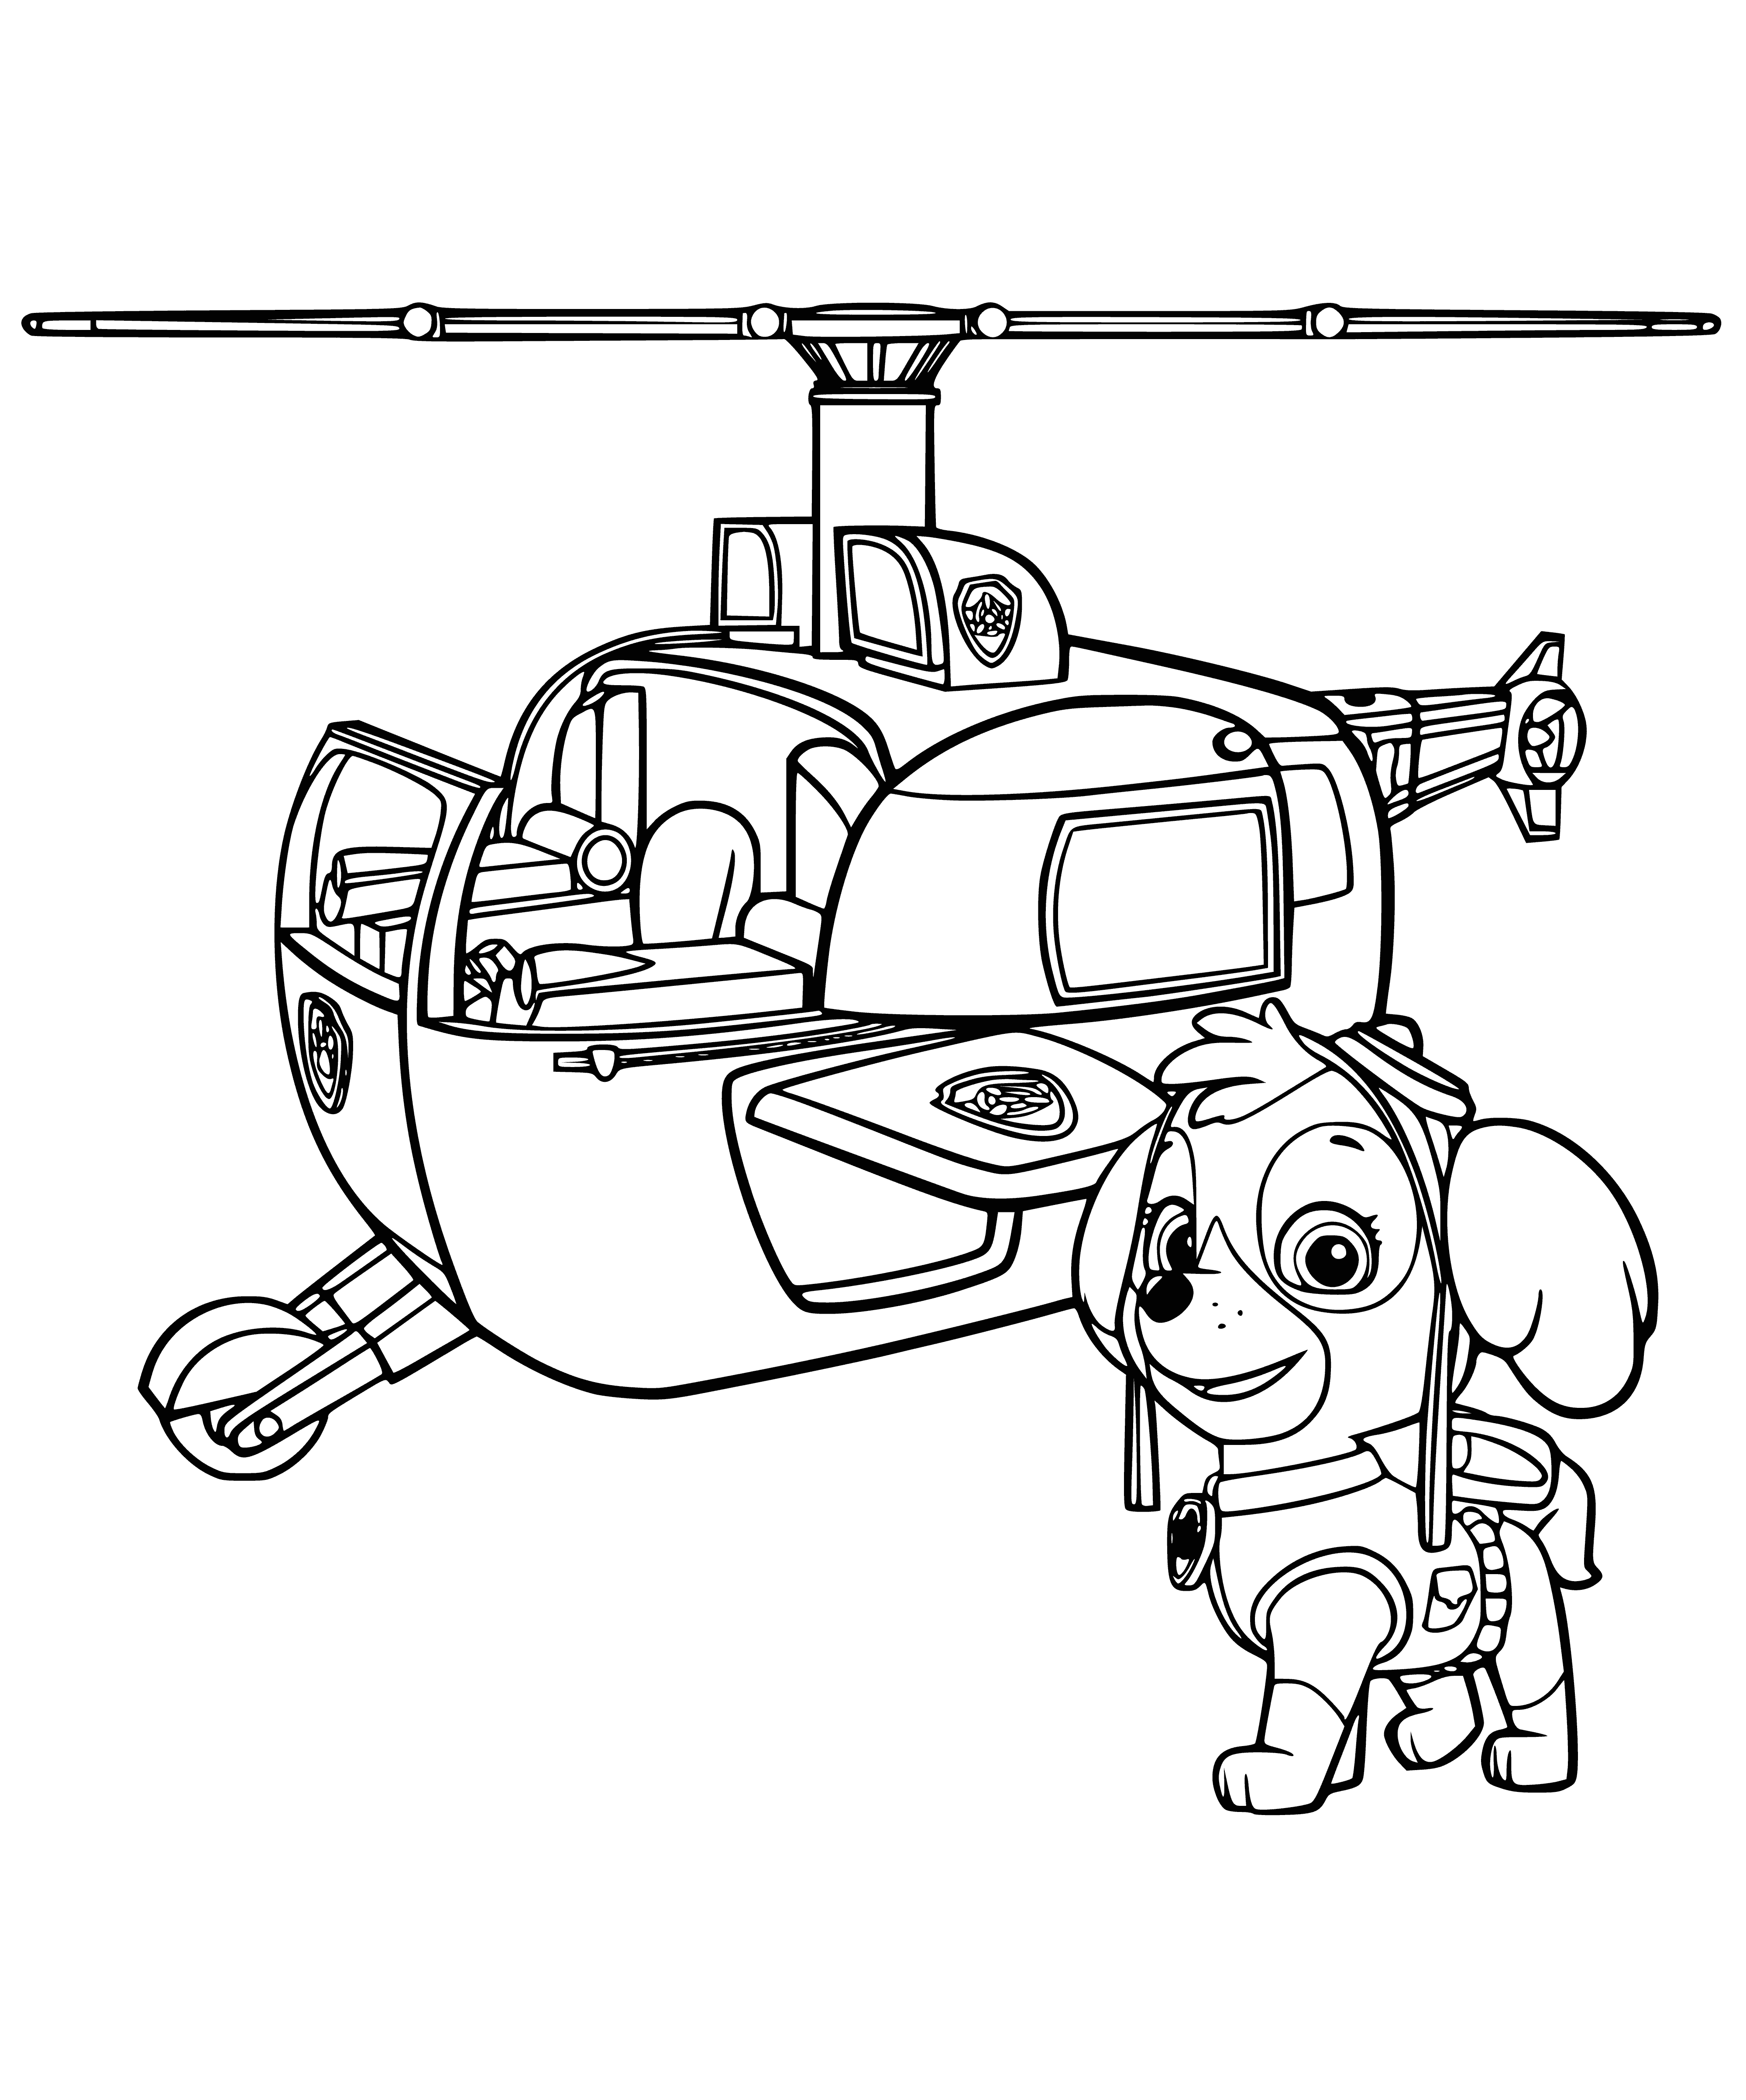 coloring page: Puppy flying a helicopter, pointing and looking down below.